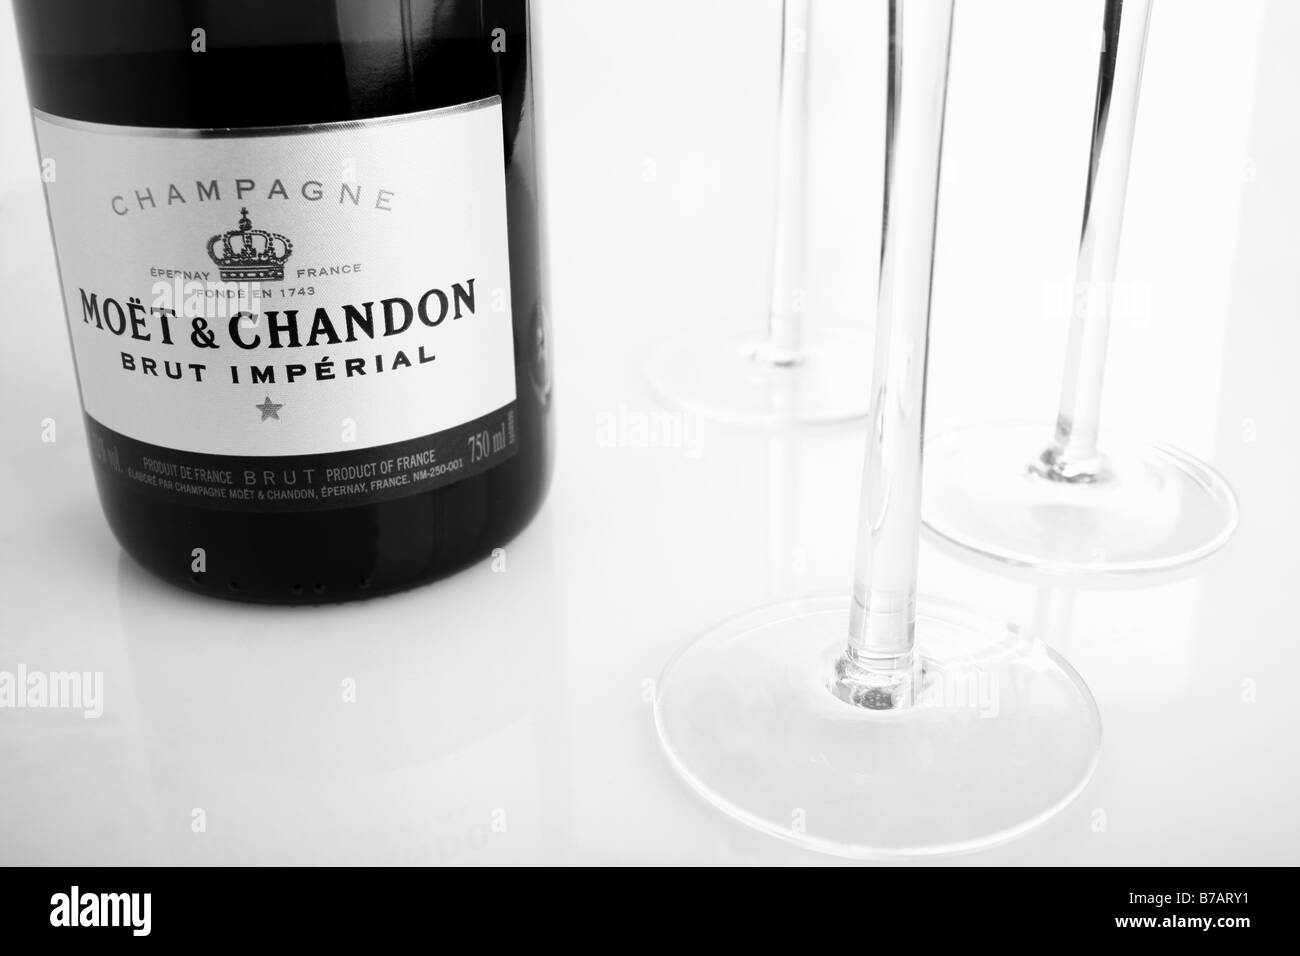 A bottle of Moet et Chandon champagne and some champagne glasses Stock Photo